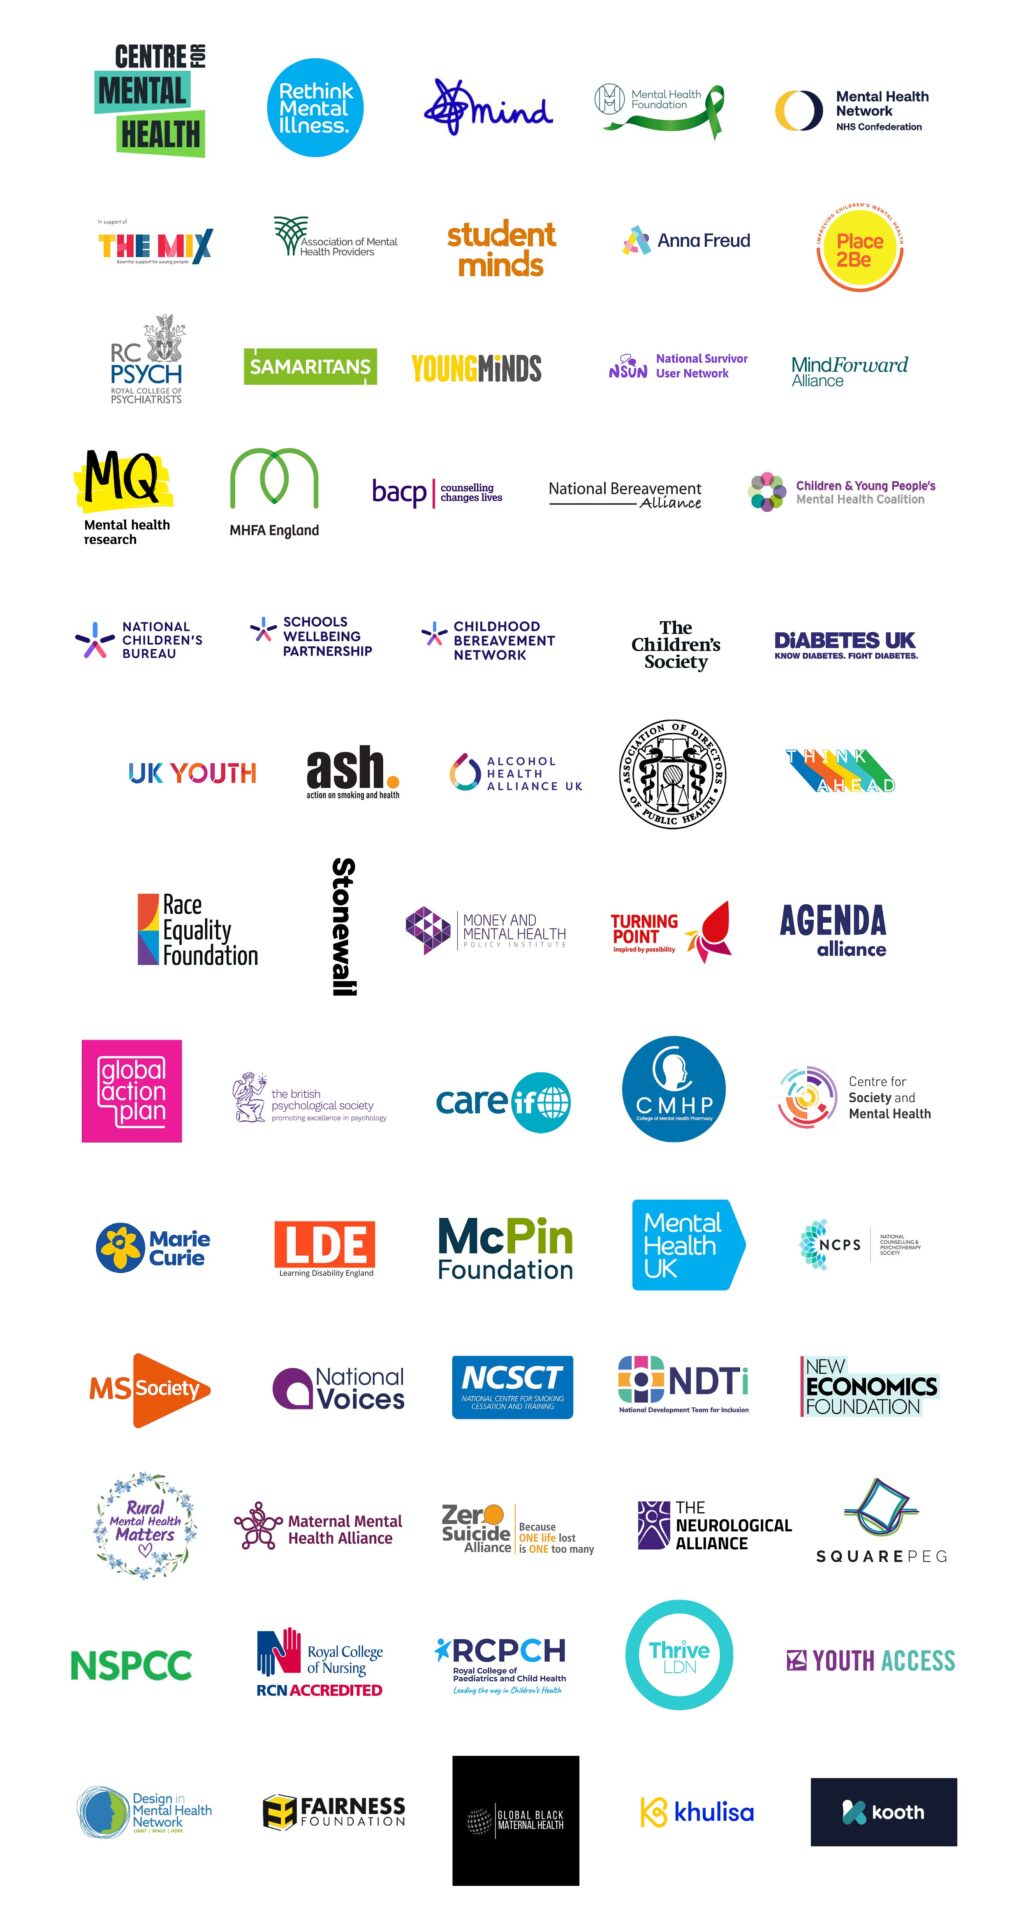 Logos of 65 organisations supporting A Mentally Healthier Nation: Centre for Mental Health, Mental Health Foundation, Mind, NHS Confederation’s Mental Health Network, Rethink Mental Illness, Royal College of Psychiatrists, Association of Mental Health Providers, Student Minds, Anna Freud Centre, The Mix, National Survivor User Network, Mind Forward Alliance, Place2Be, Samaritans, YoungMinds, MQ Mental Health Network, MHFA England, BACP, National Children's Bureau, Schools Wellbeing Partnership, Childhood Bereavement Network, National Bereavement Alliance, Children & Young People's Mental Health Coalition, UK Youth, ASH, Alcohol Health Alliance UK, Association of Directors of Public Health, The Children's Society, Diabetes UK, Race Equality Foundation, Stonewall, Money & Mental Health Policy Institute, Turning Point, Agenda Alliance, Think Ahead, Global Action Plan, BPS, CareIf, CMHP, Centre for Society & Mental Health, Marie Curie, MS Society, National Voices, NCSCT, NDTI, New Economics Foundation, The Neurological Alliance, NSPCC, Royal College of Nursing, RCPCH, Thrive LDN, Youth Access and others